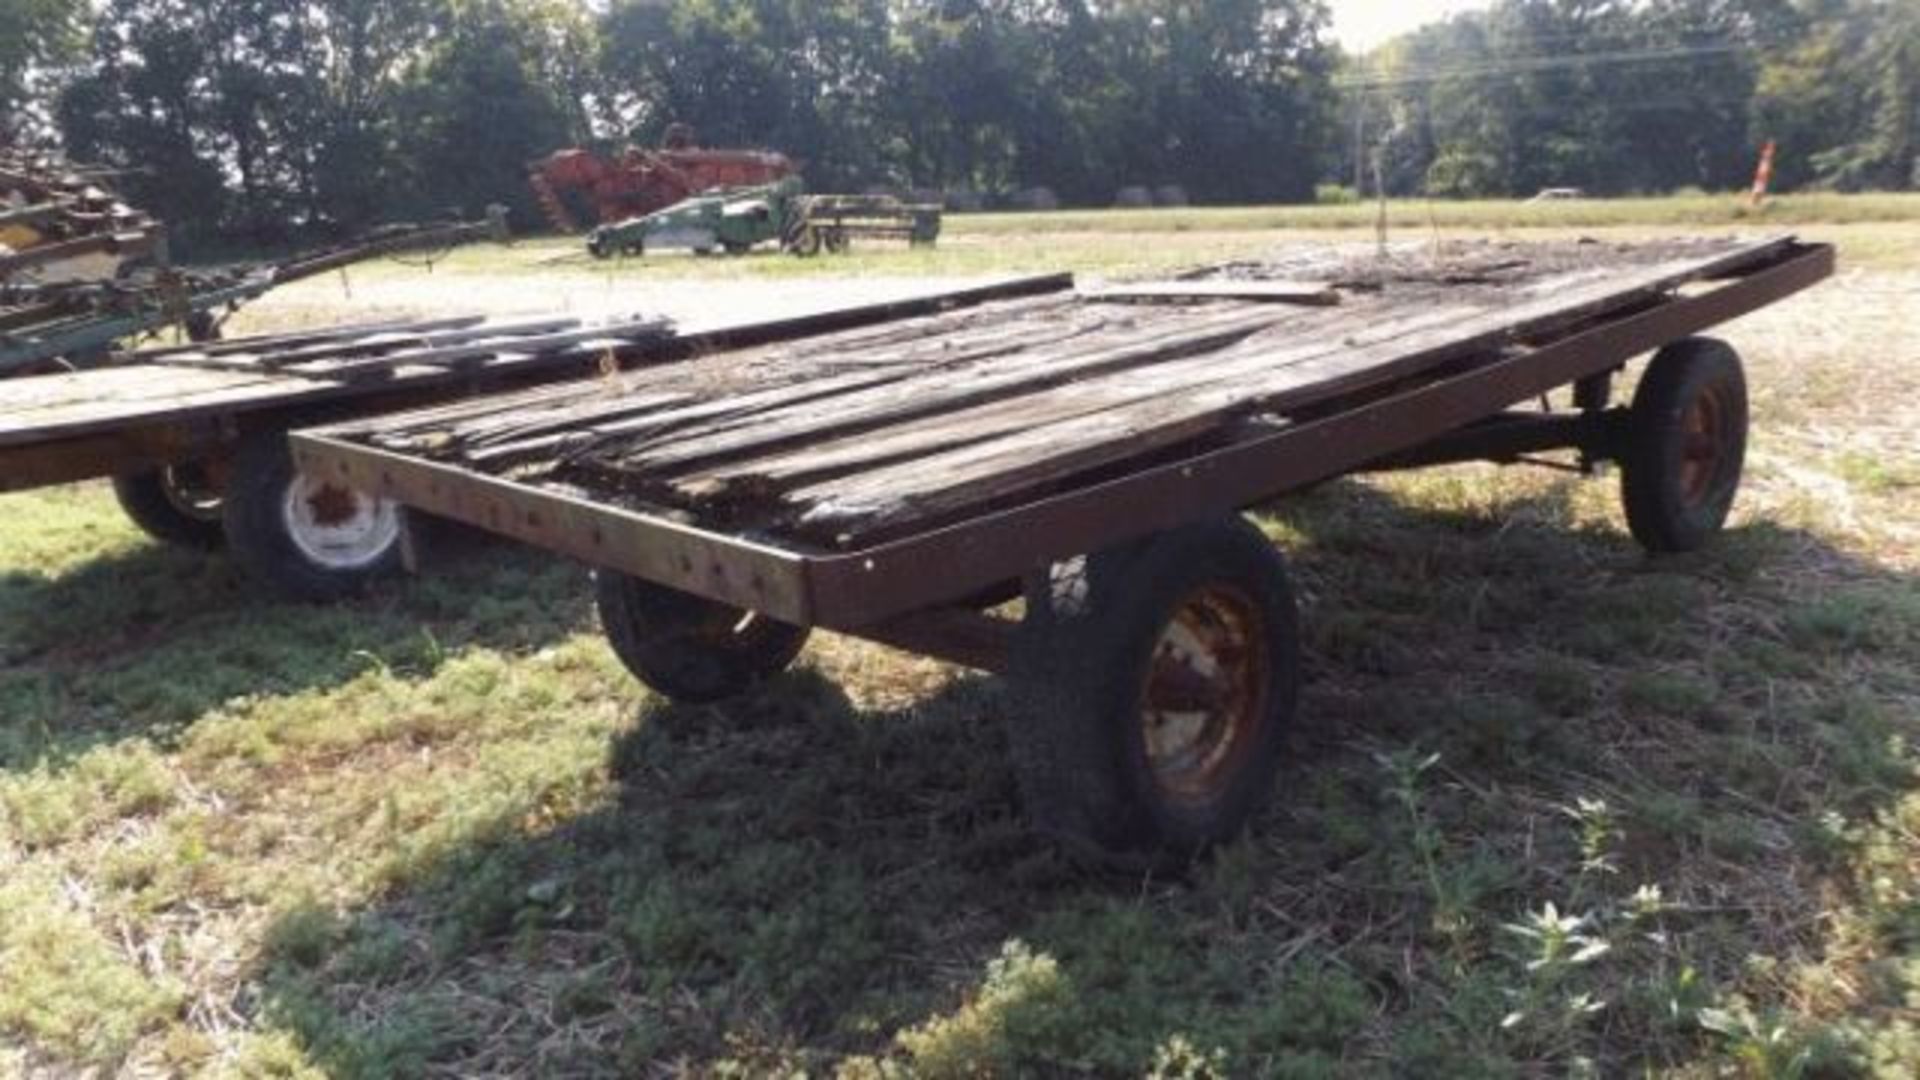 Lot 430 7'x14' Wagon w/JD Running Gear and Hoist - Image 2 of 2